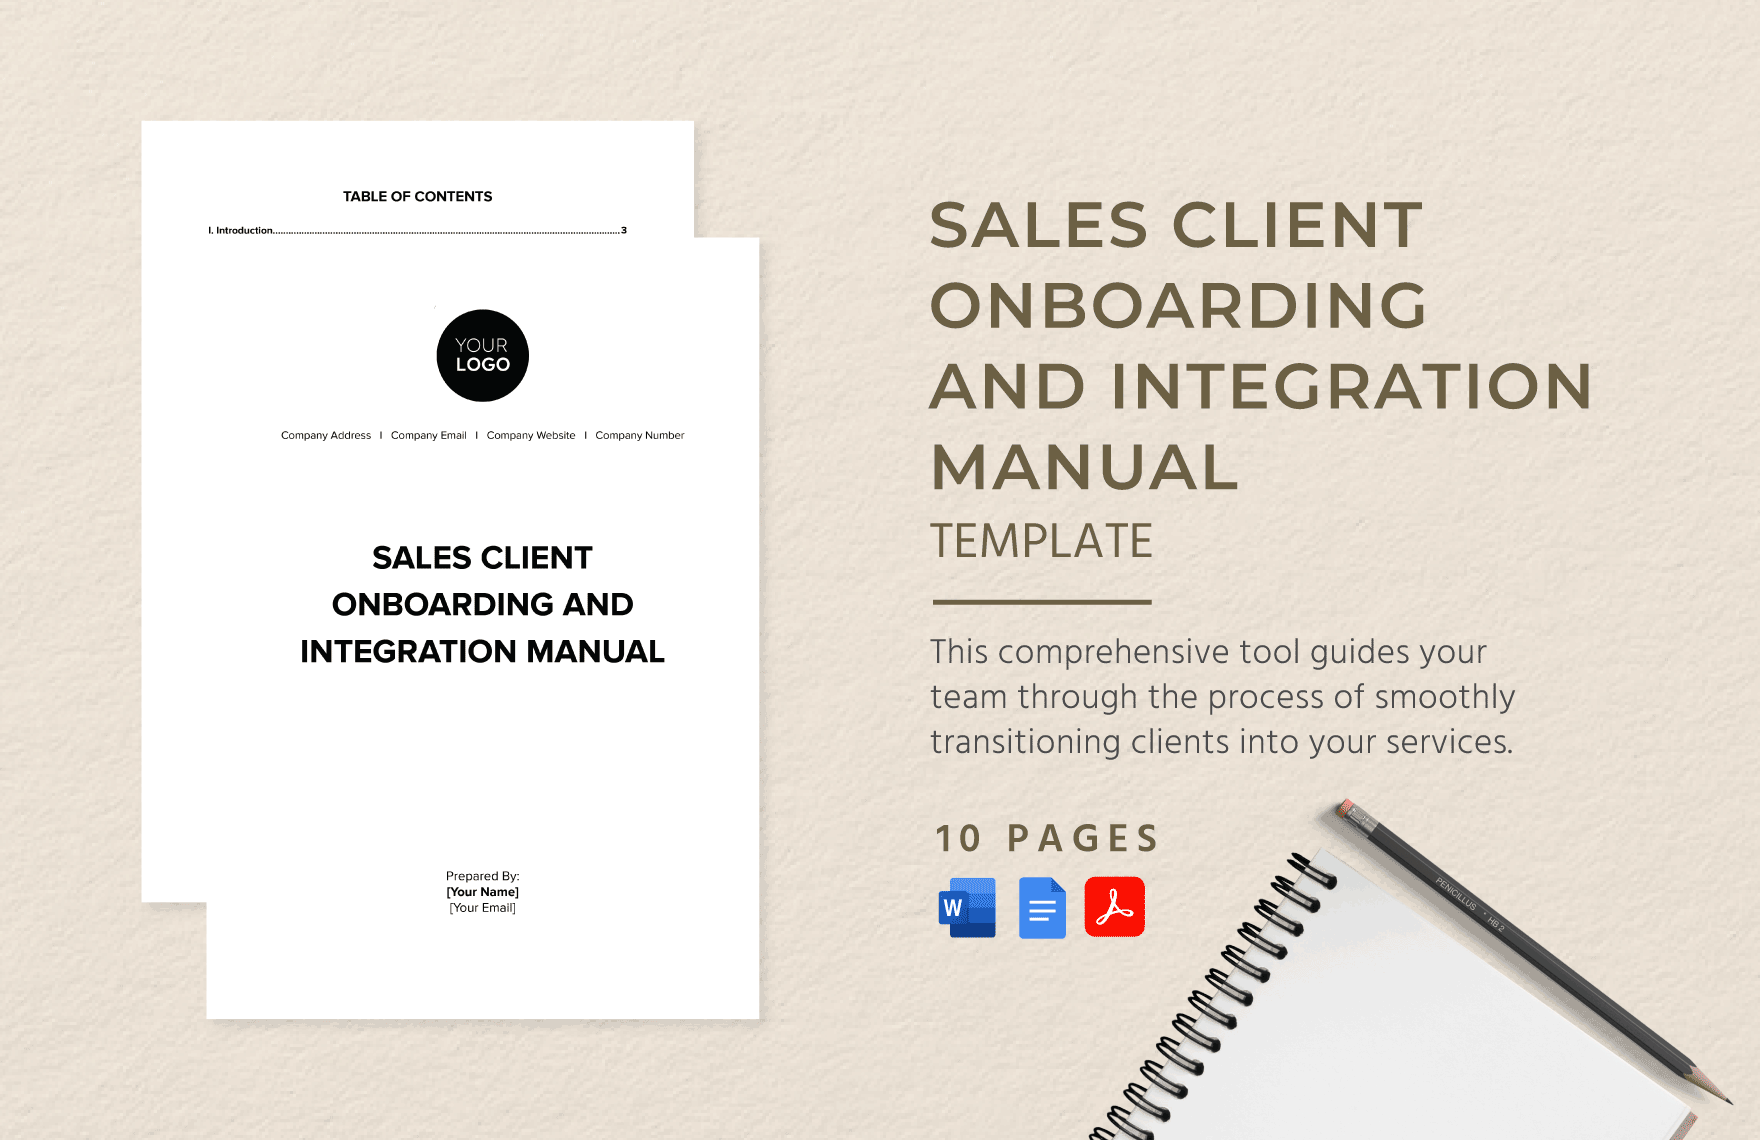 Sales Client Onboarding and Integration Manual Template